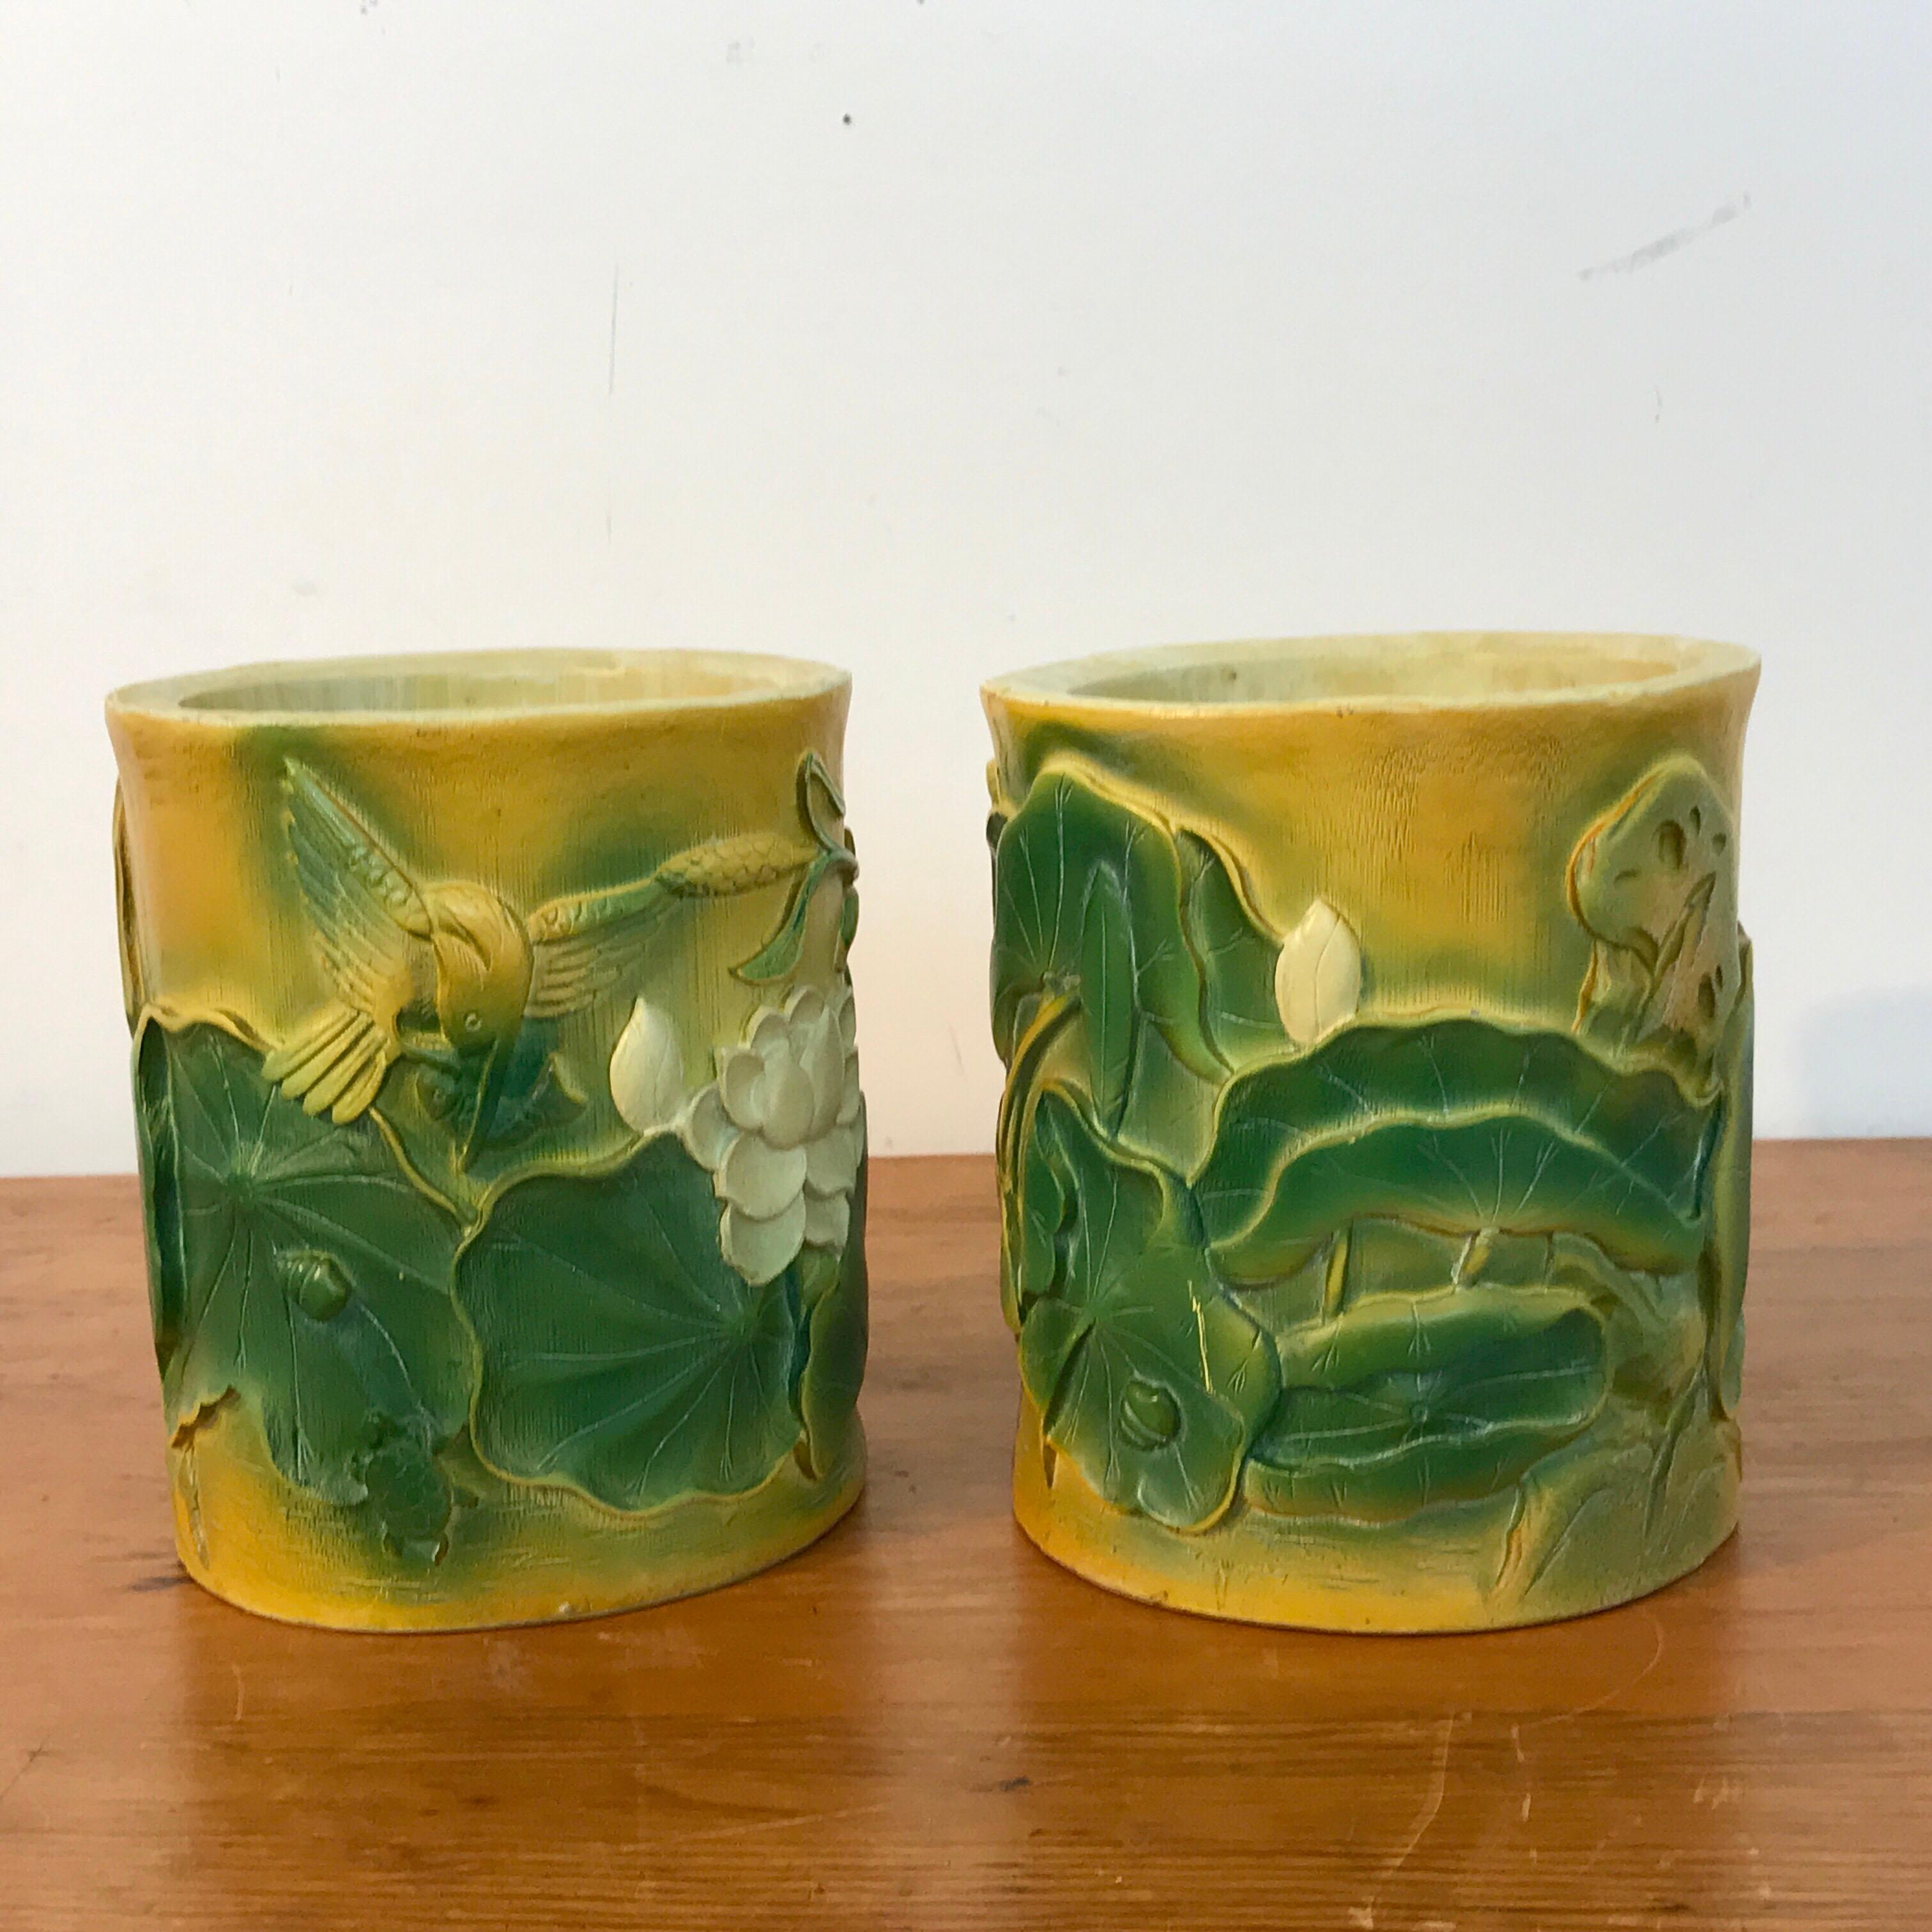 Pair of Hollywood Regency Chinese bamboo Motif Brushpot Motif Cachepots, Each one with colorful floral incised decoration. The interior measures 4.5